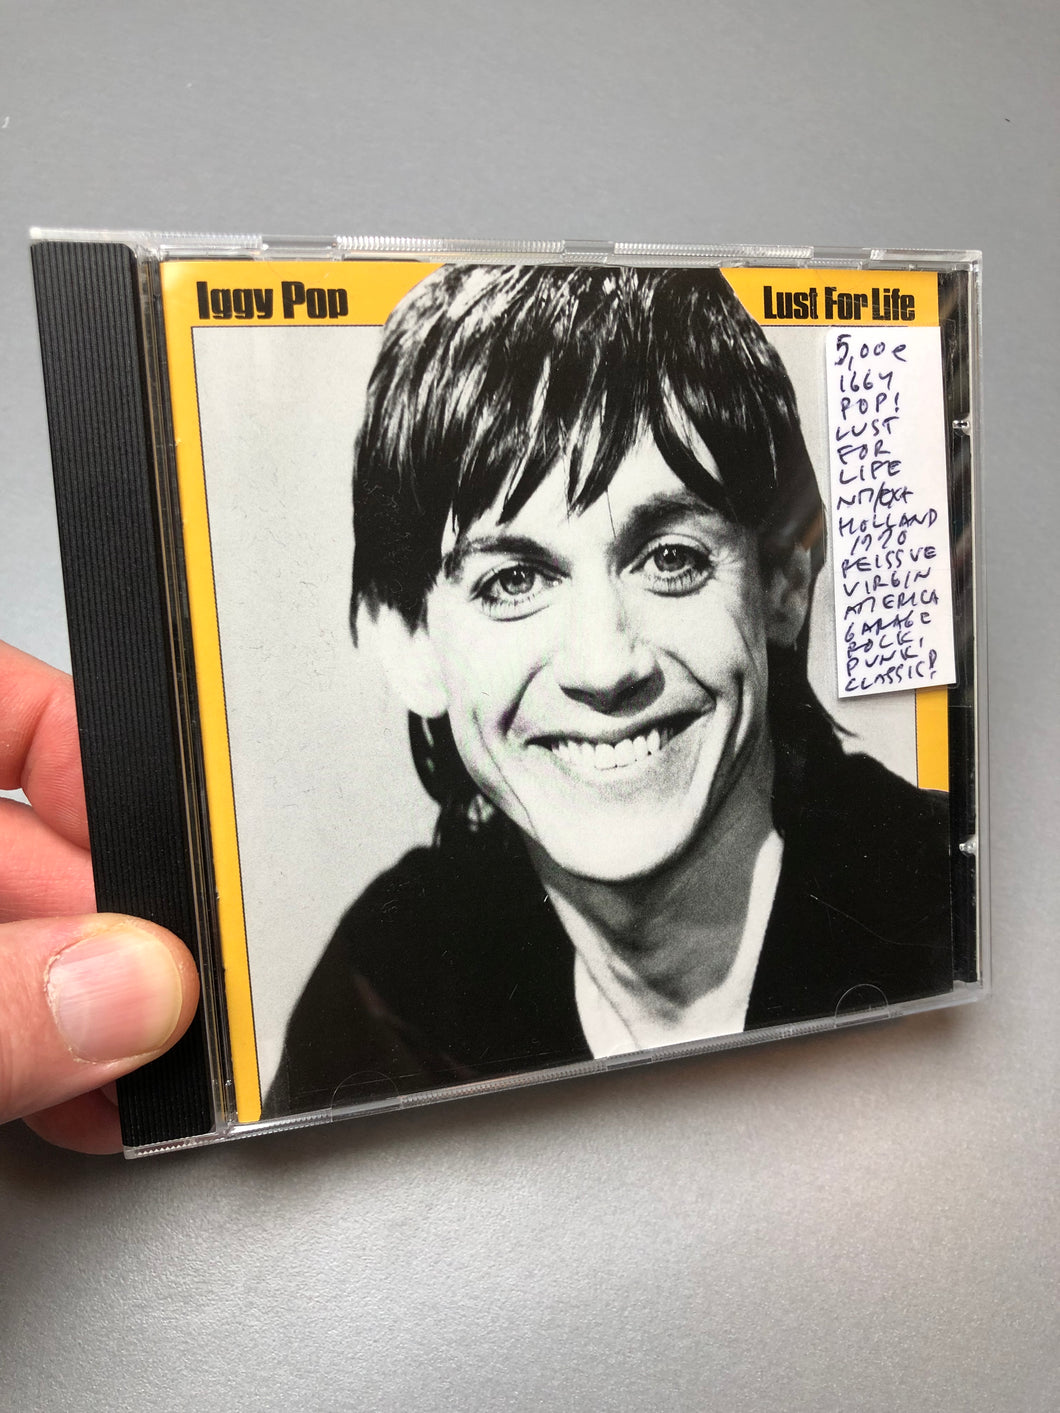 Iggy Pop: Lust For Life, reissue, Holland 1990